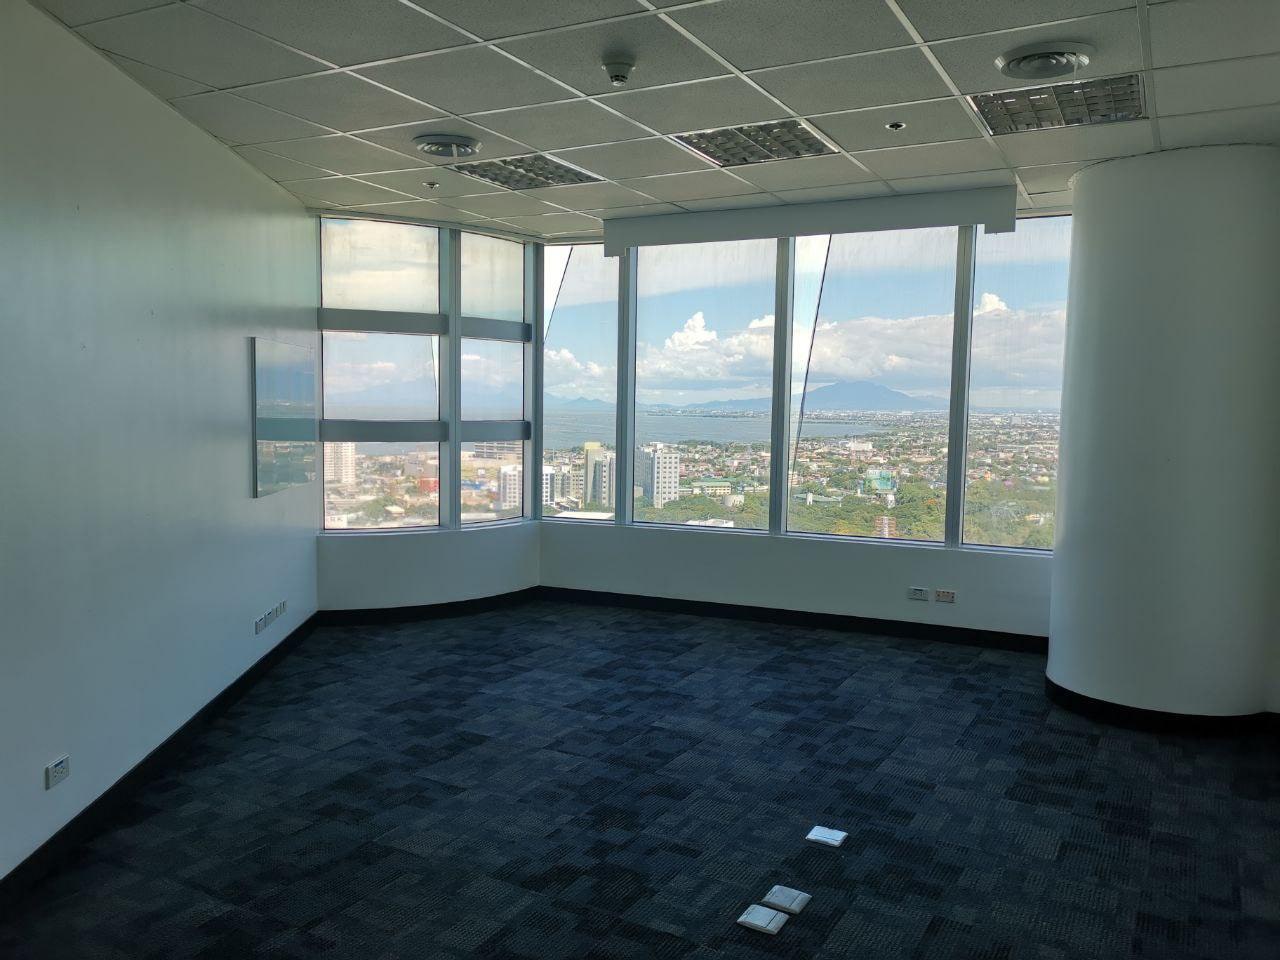 KMC | Insular Life Corporate Center Office Space for lease in Alabang, Philippines